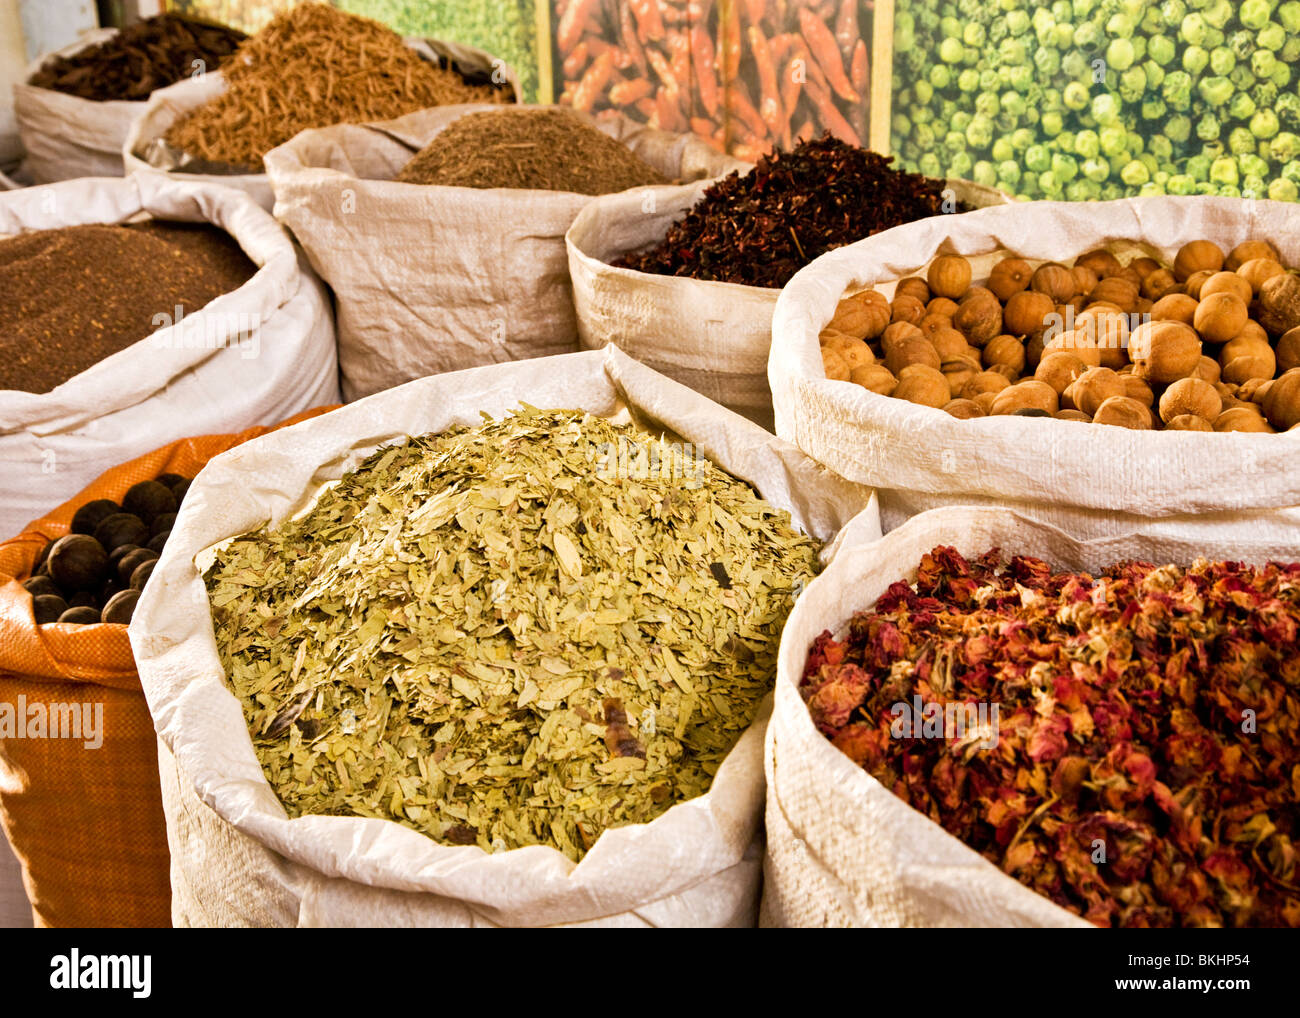 Arabian spices on display in sacks outside a shop in the spice souk in Deira, Dubai, UAE Stock Photo